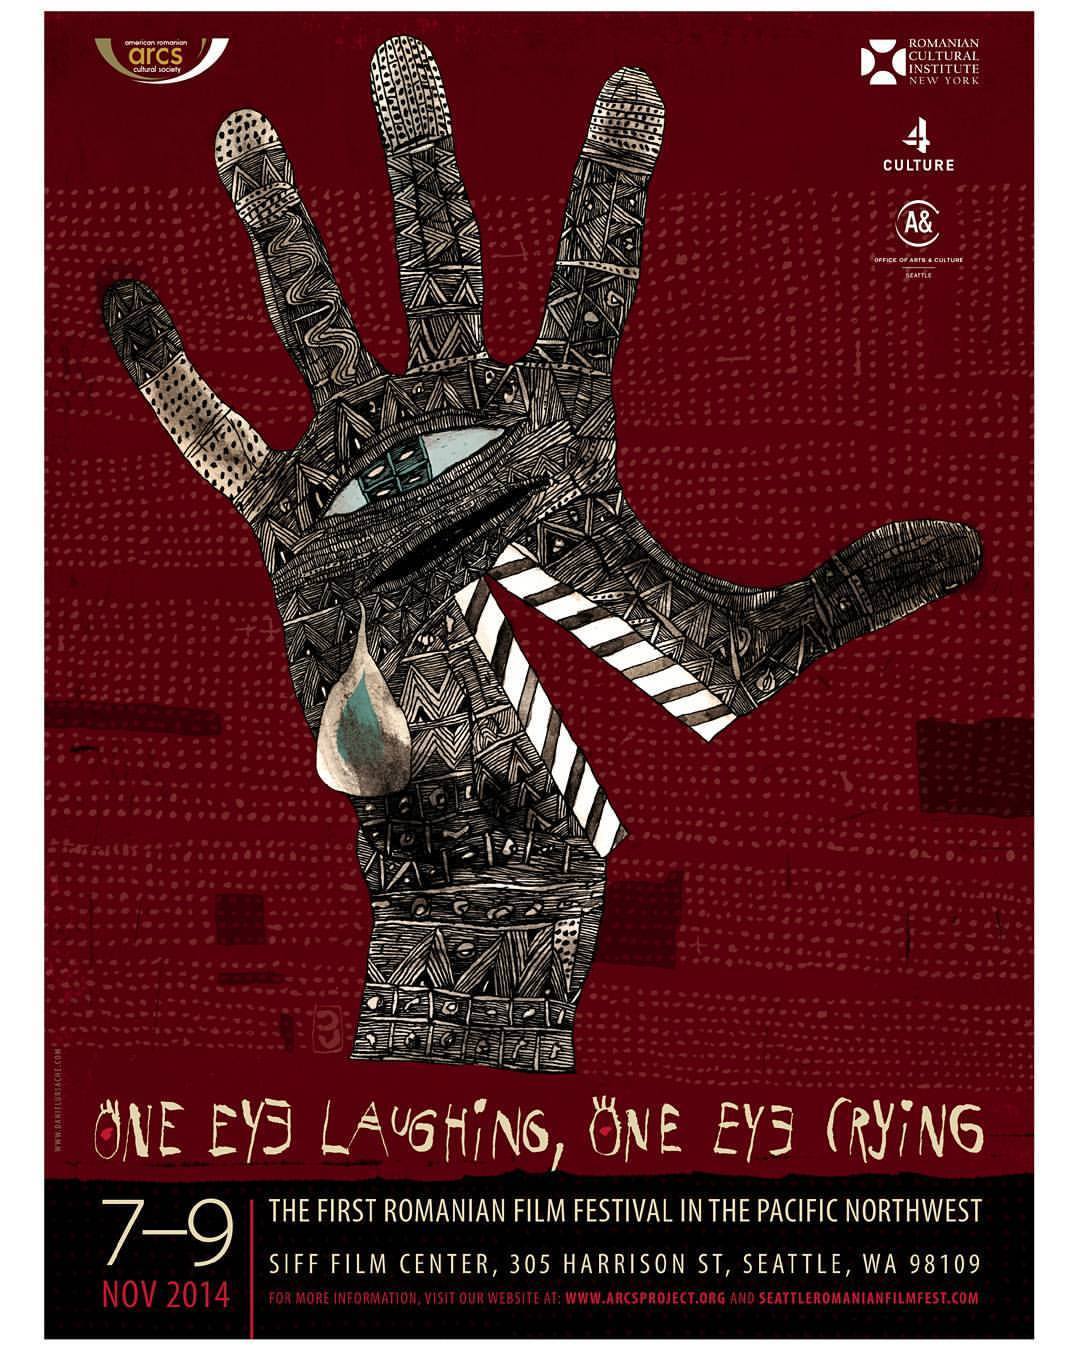 Poster image for Romanian Film Festival - 1st Edition